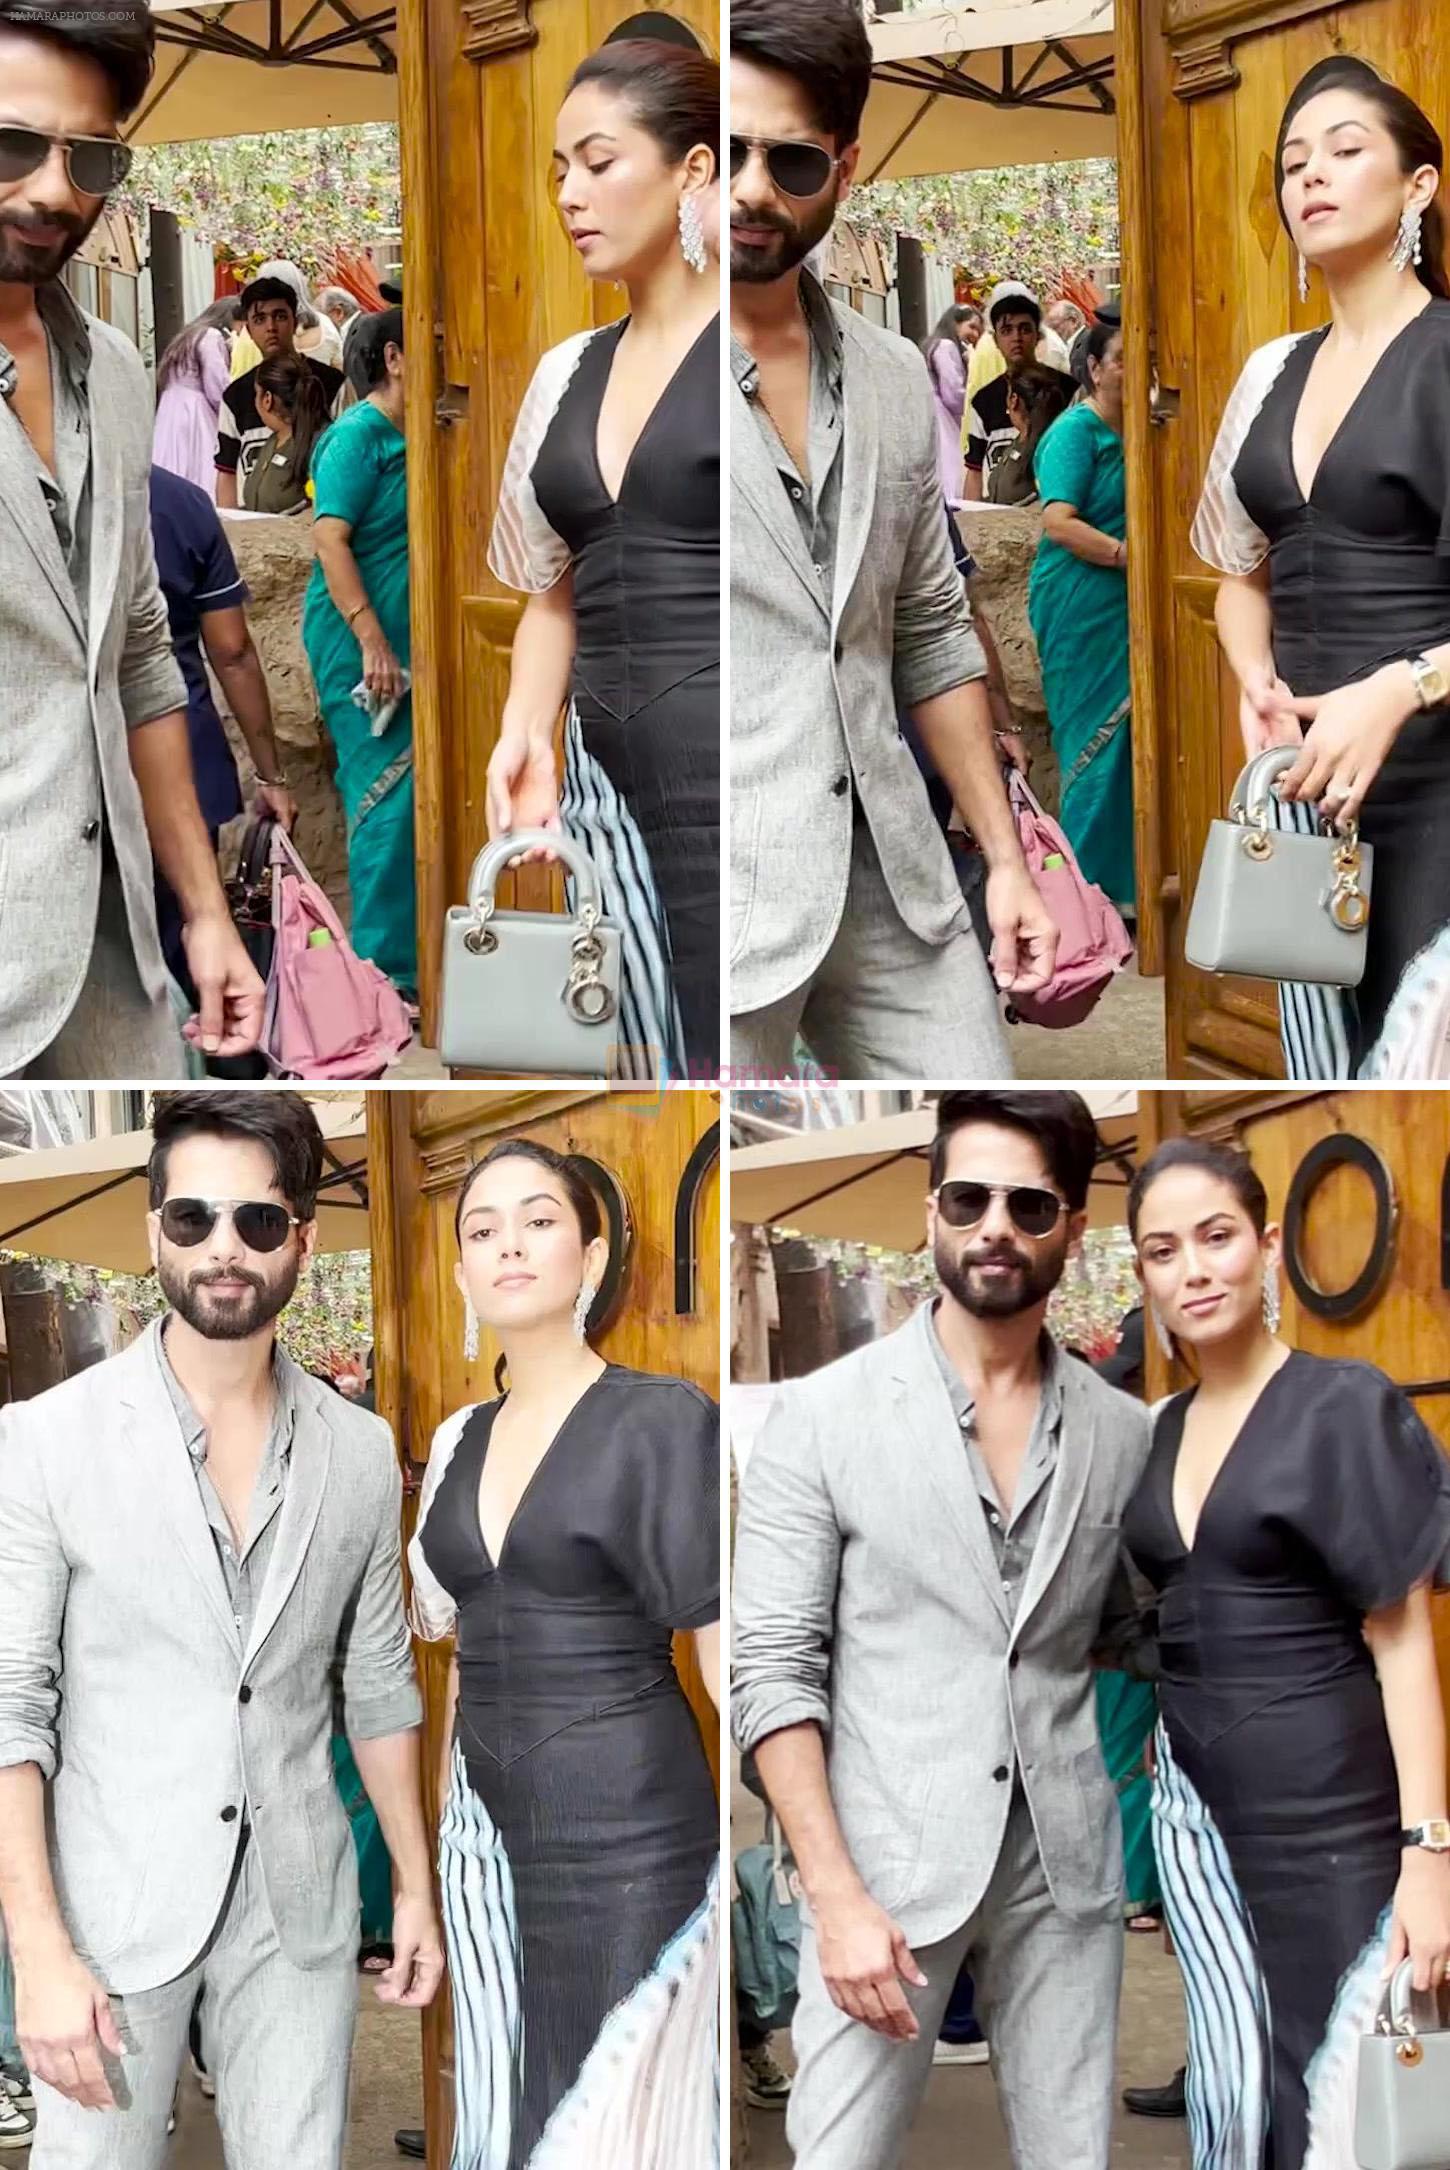 Shahid Kapoor With Mira Rajput Spotted For Pankaj Kapoor Party At One 8 Commune Juhu on 2nd September 2023